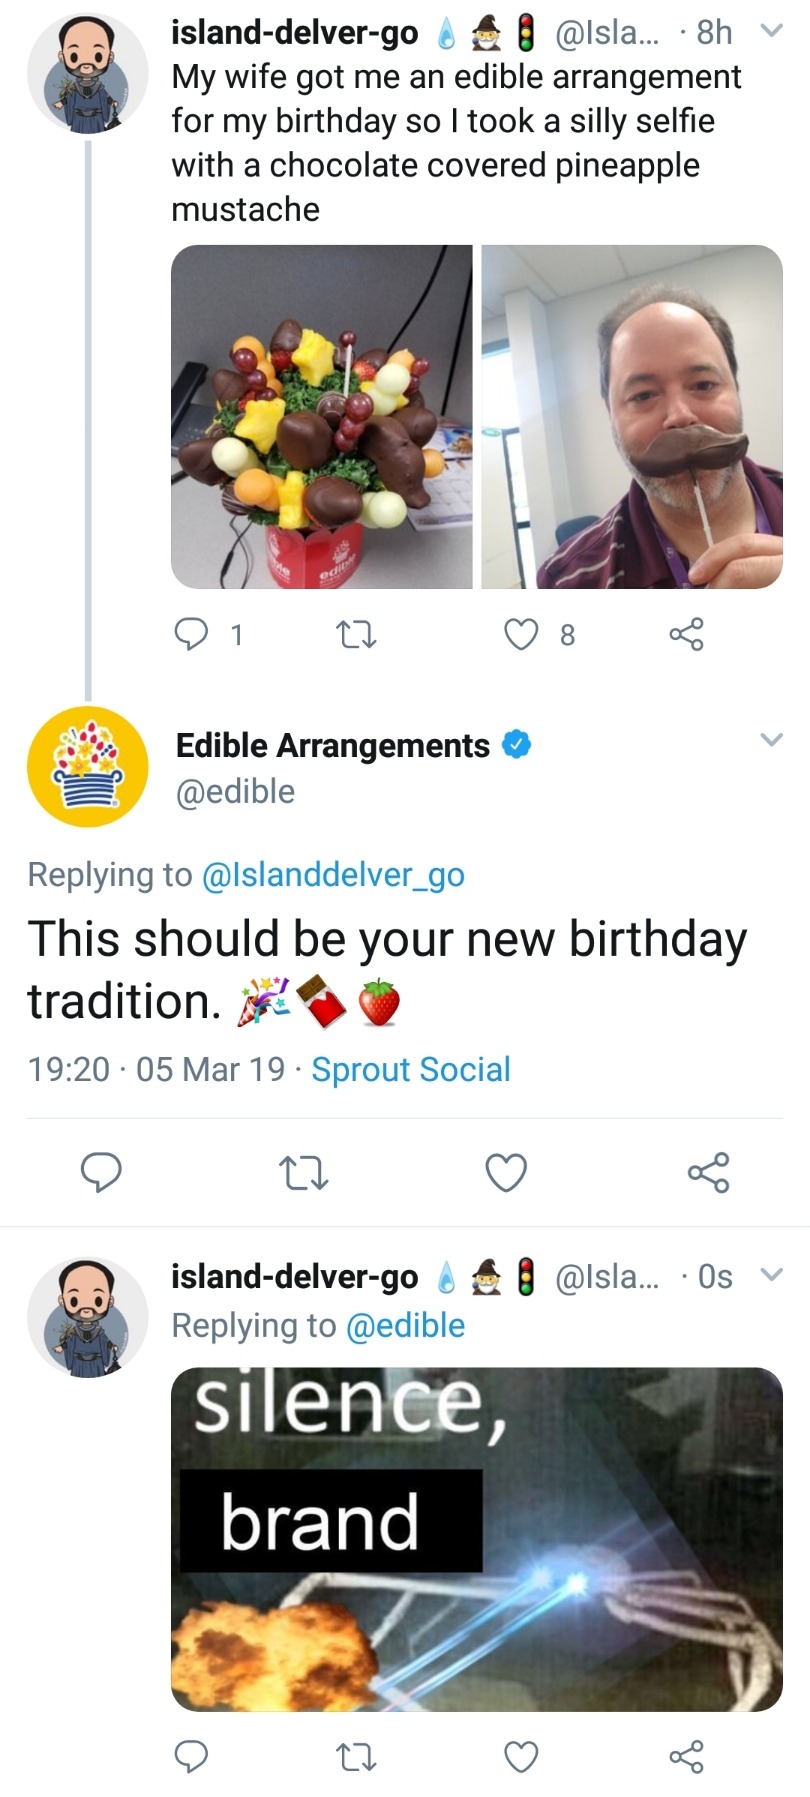 island-delver-go:  Edible arrangements trying to use my birthday? No thanks